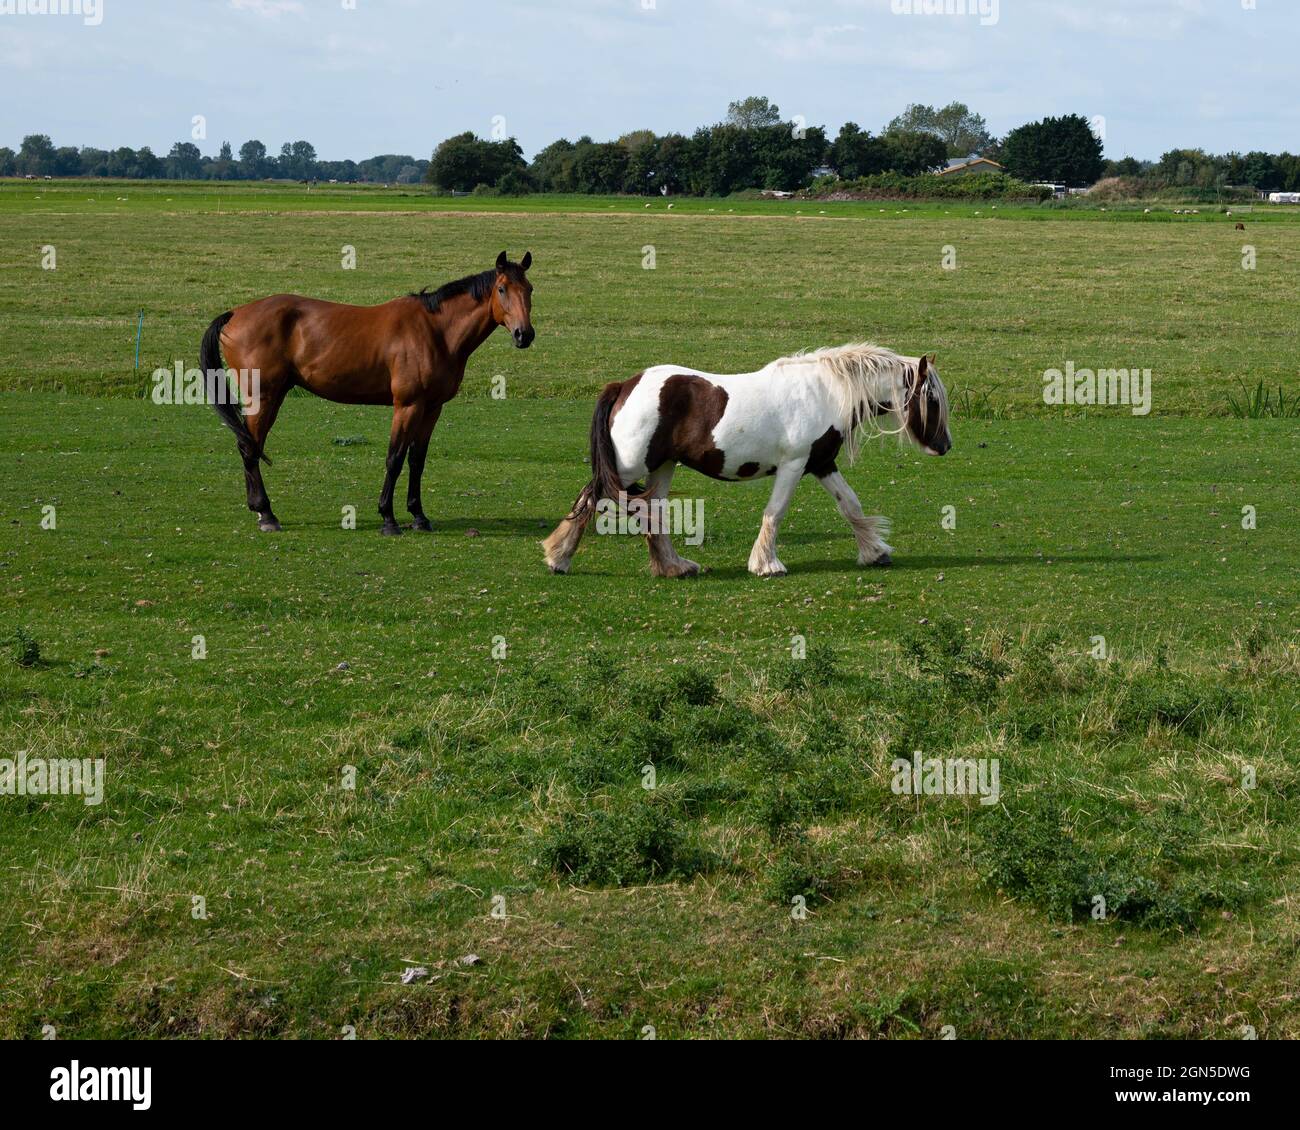 Two horses on agriculture farmland landscape in Petten (The Netherlands) Stock Photo